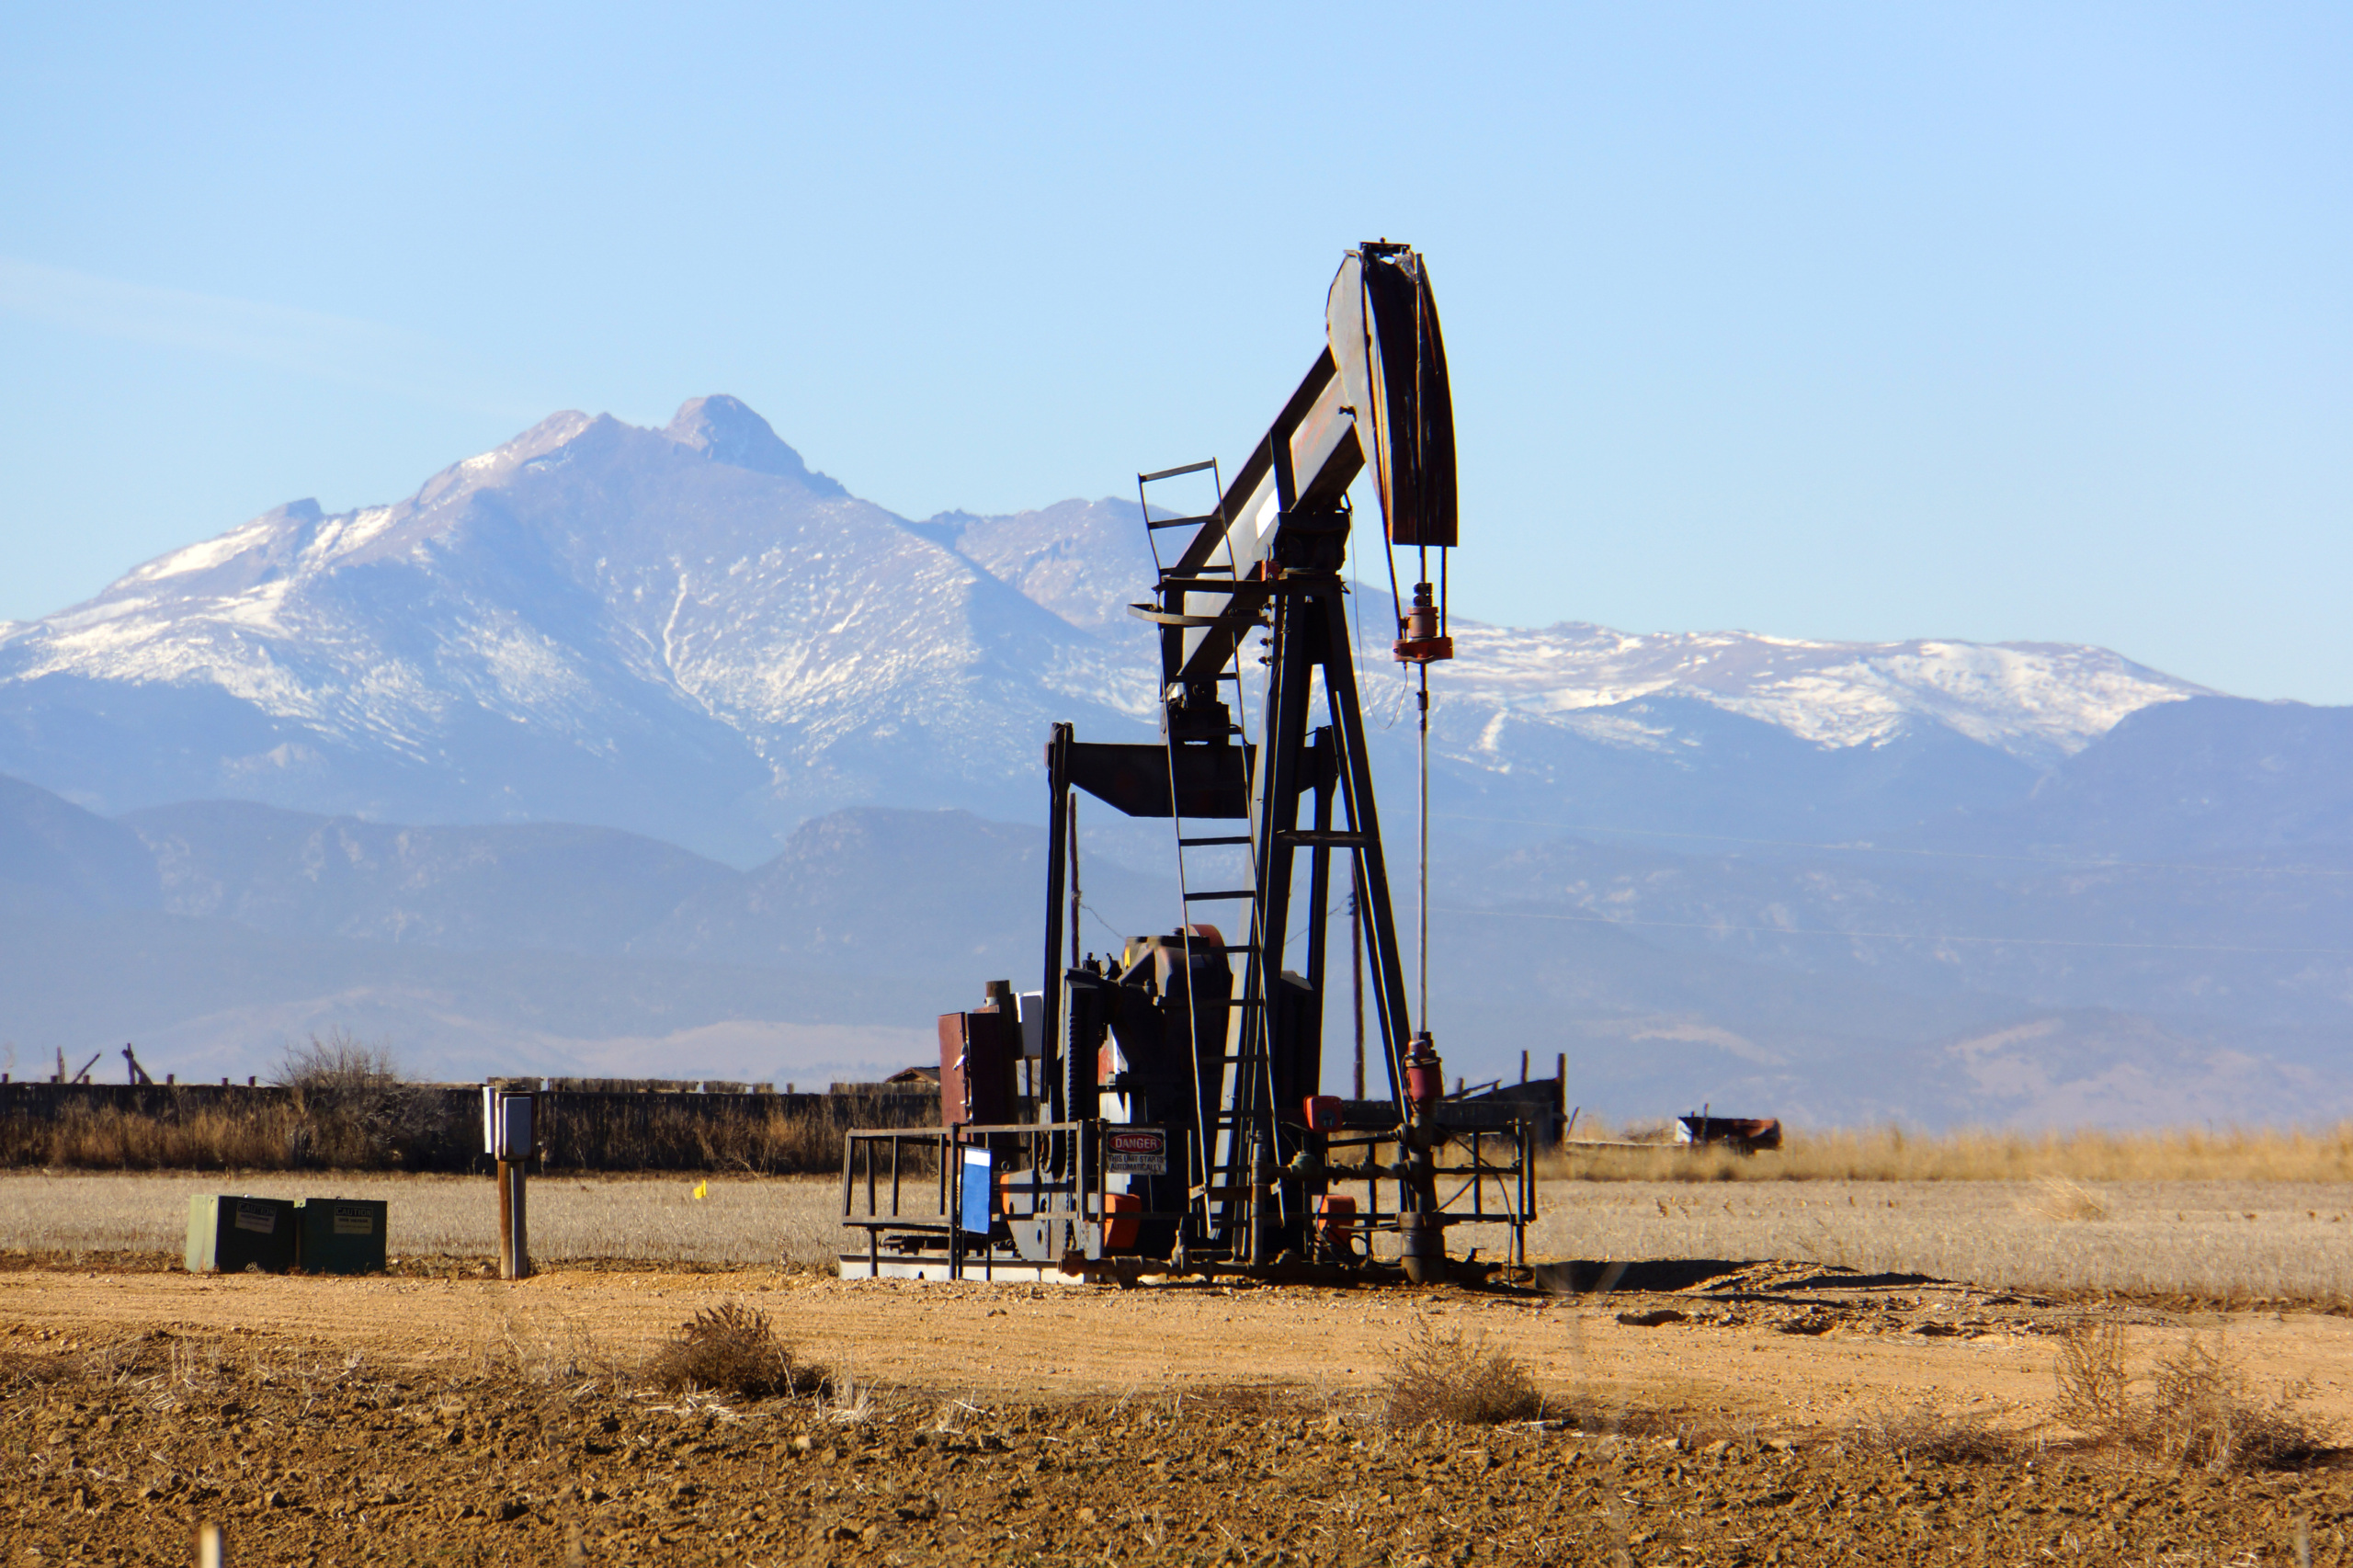 An oil pump in Colorado with Rocky Mountains in the background